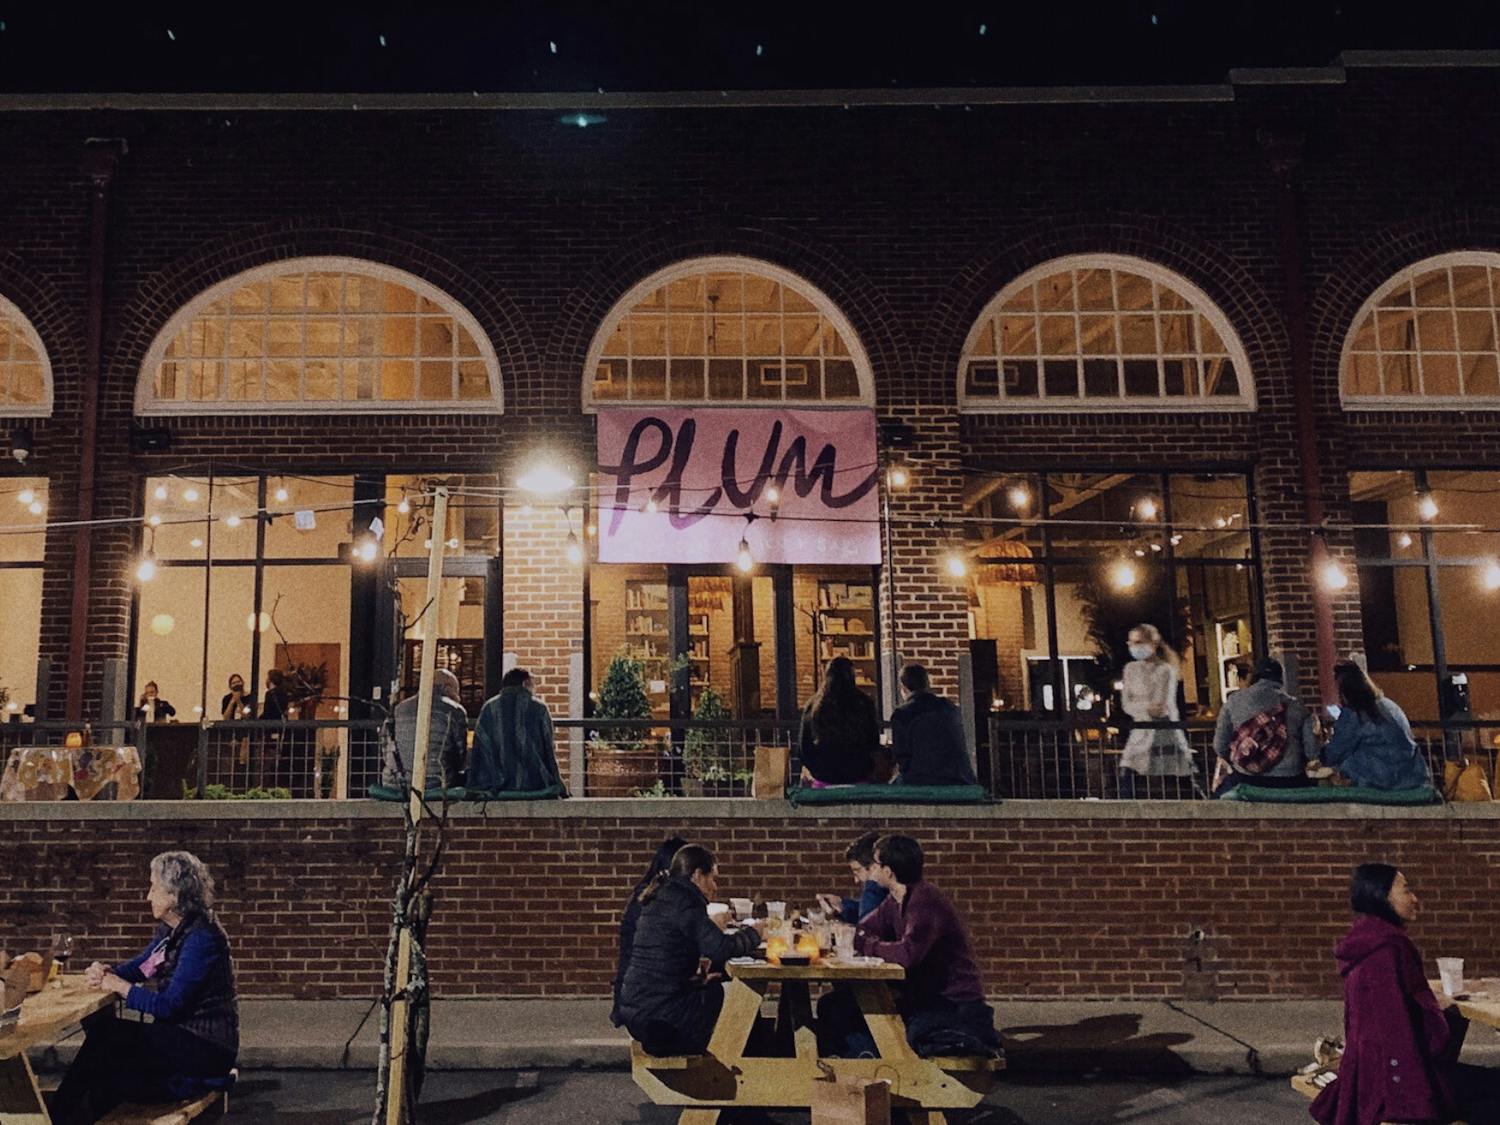 Specializing in southern comfort food, the newest restaurant to open its doors in Durham is named Plum.